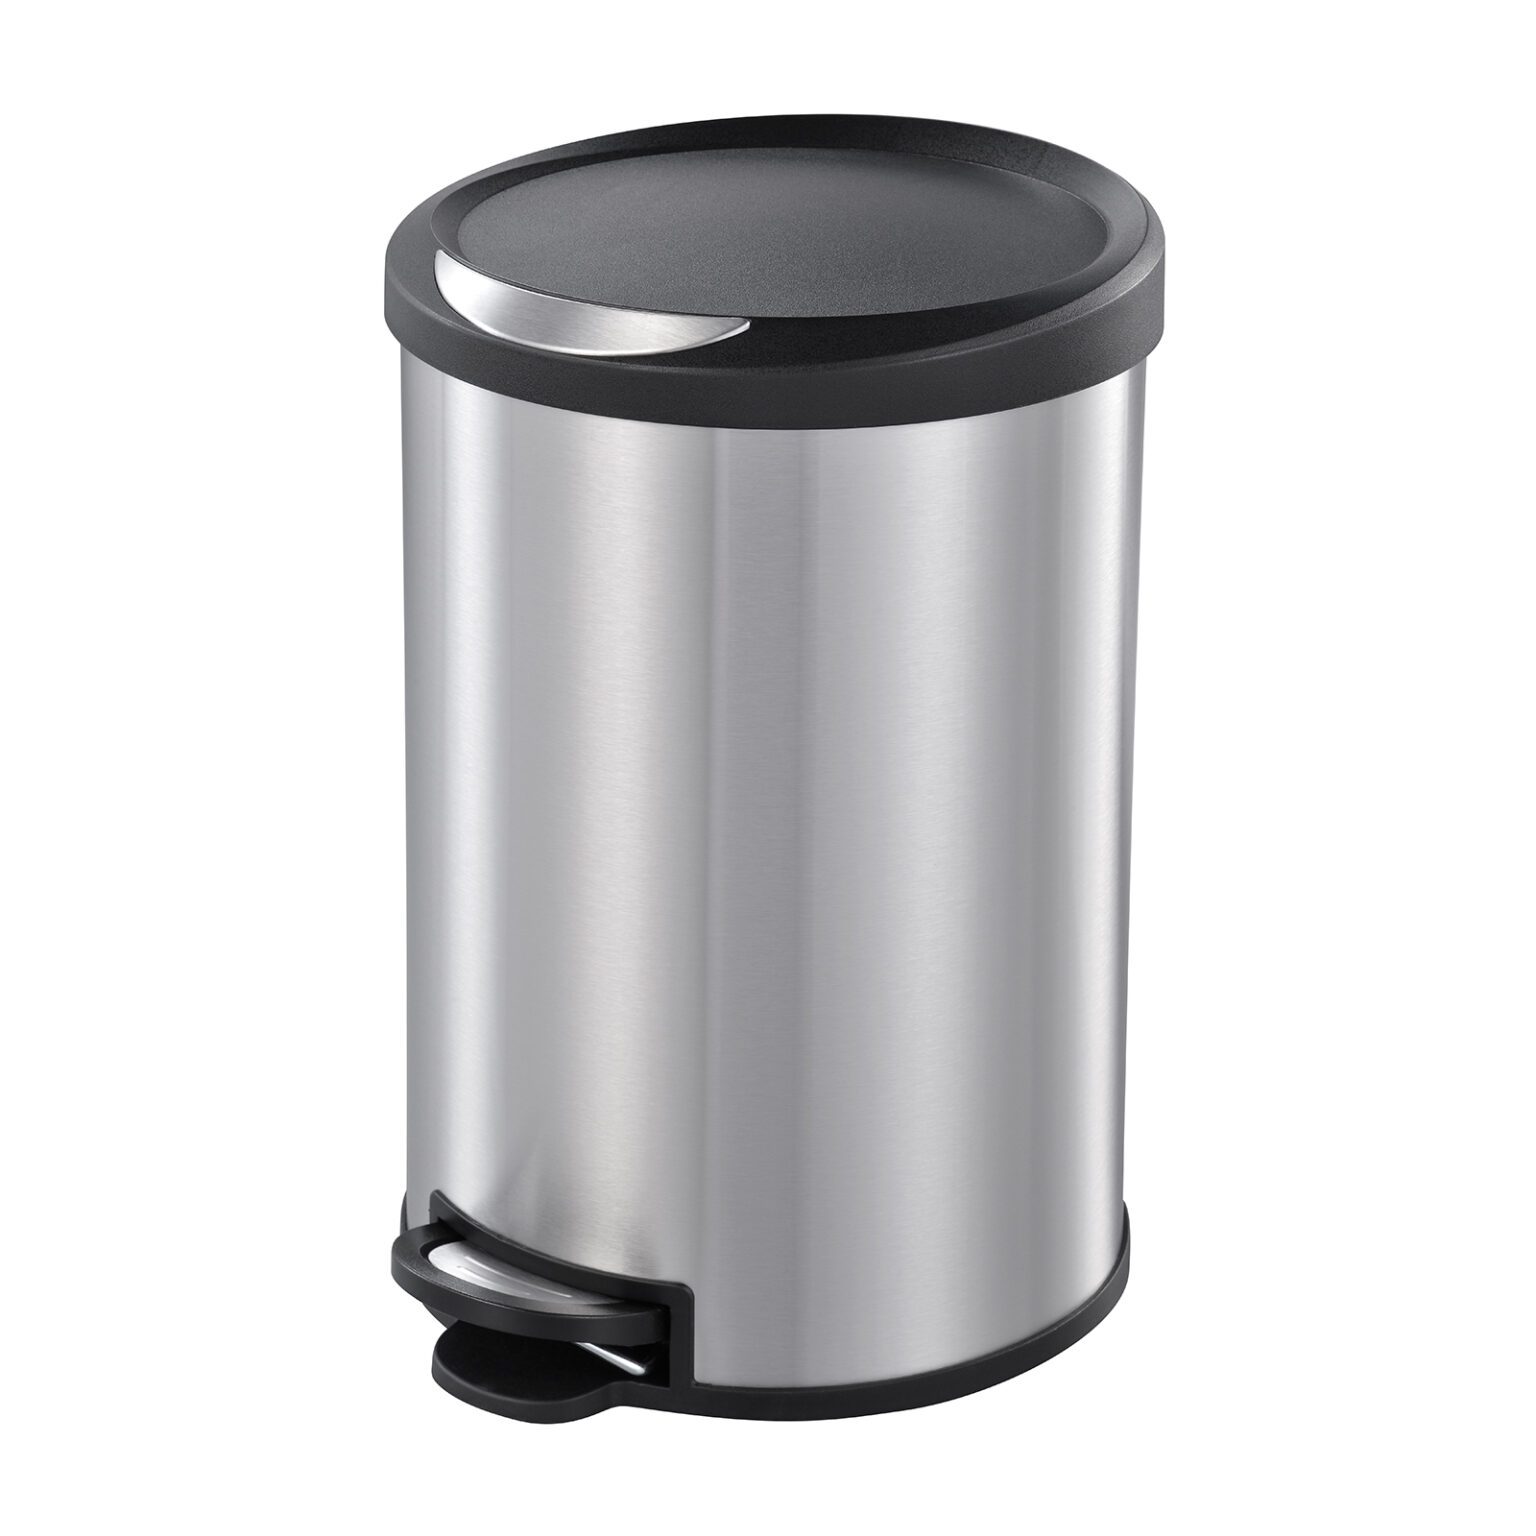 19367-Edco-20L-Round-Stainless-Steel-Pedal-Bin